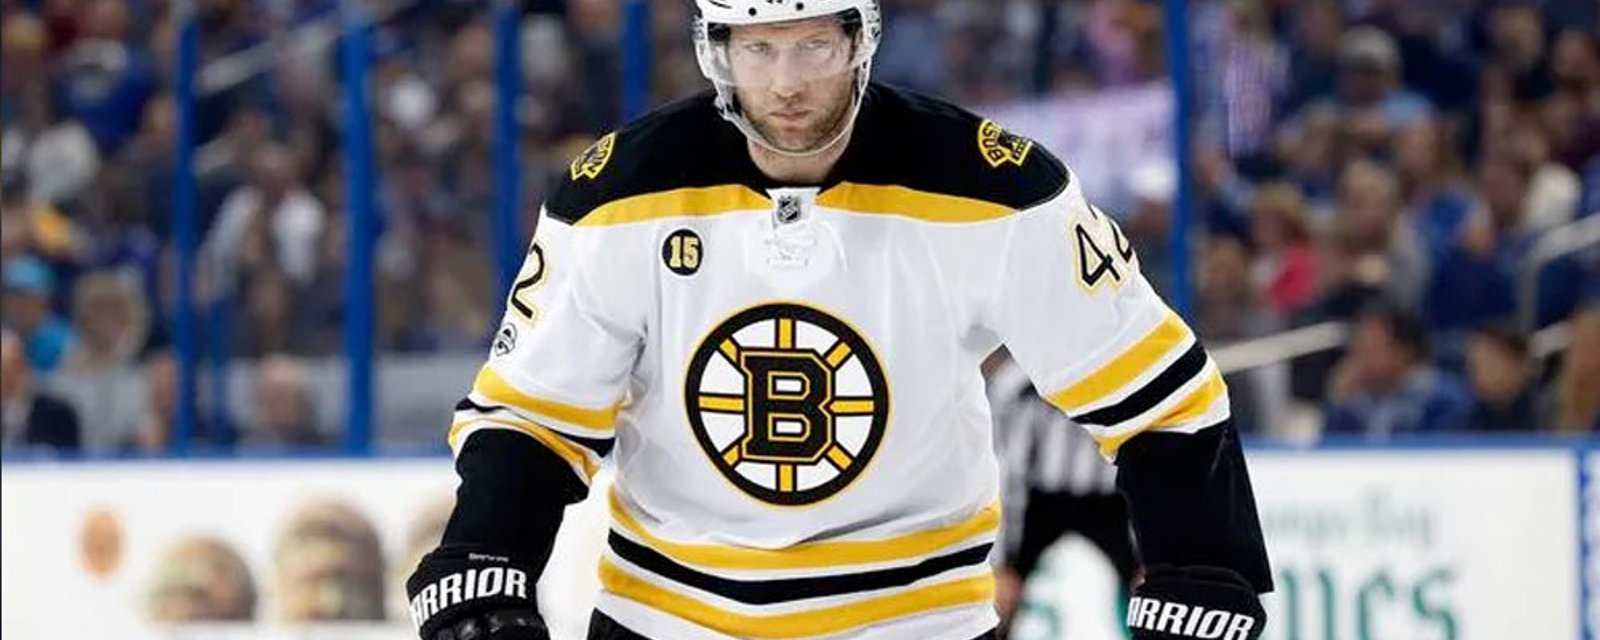 Bruins release a statement on David Backes’ playing future